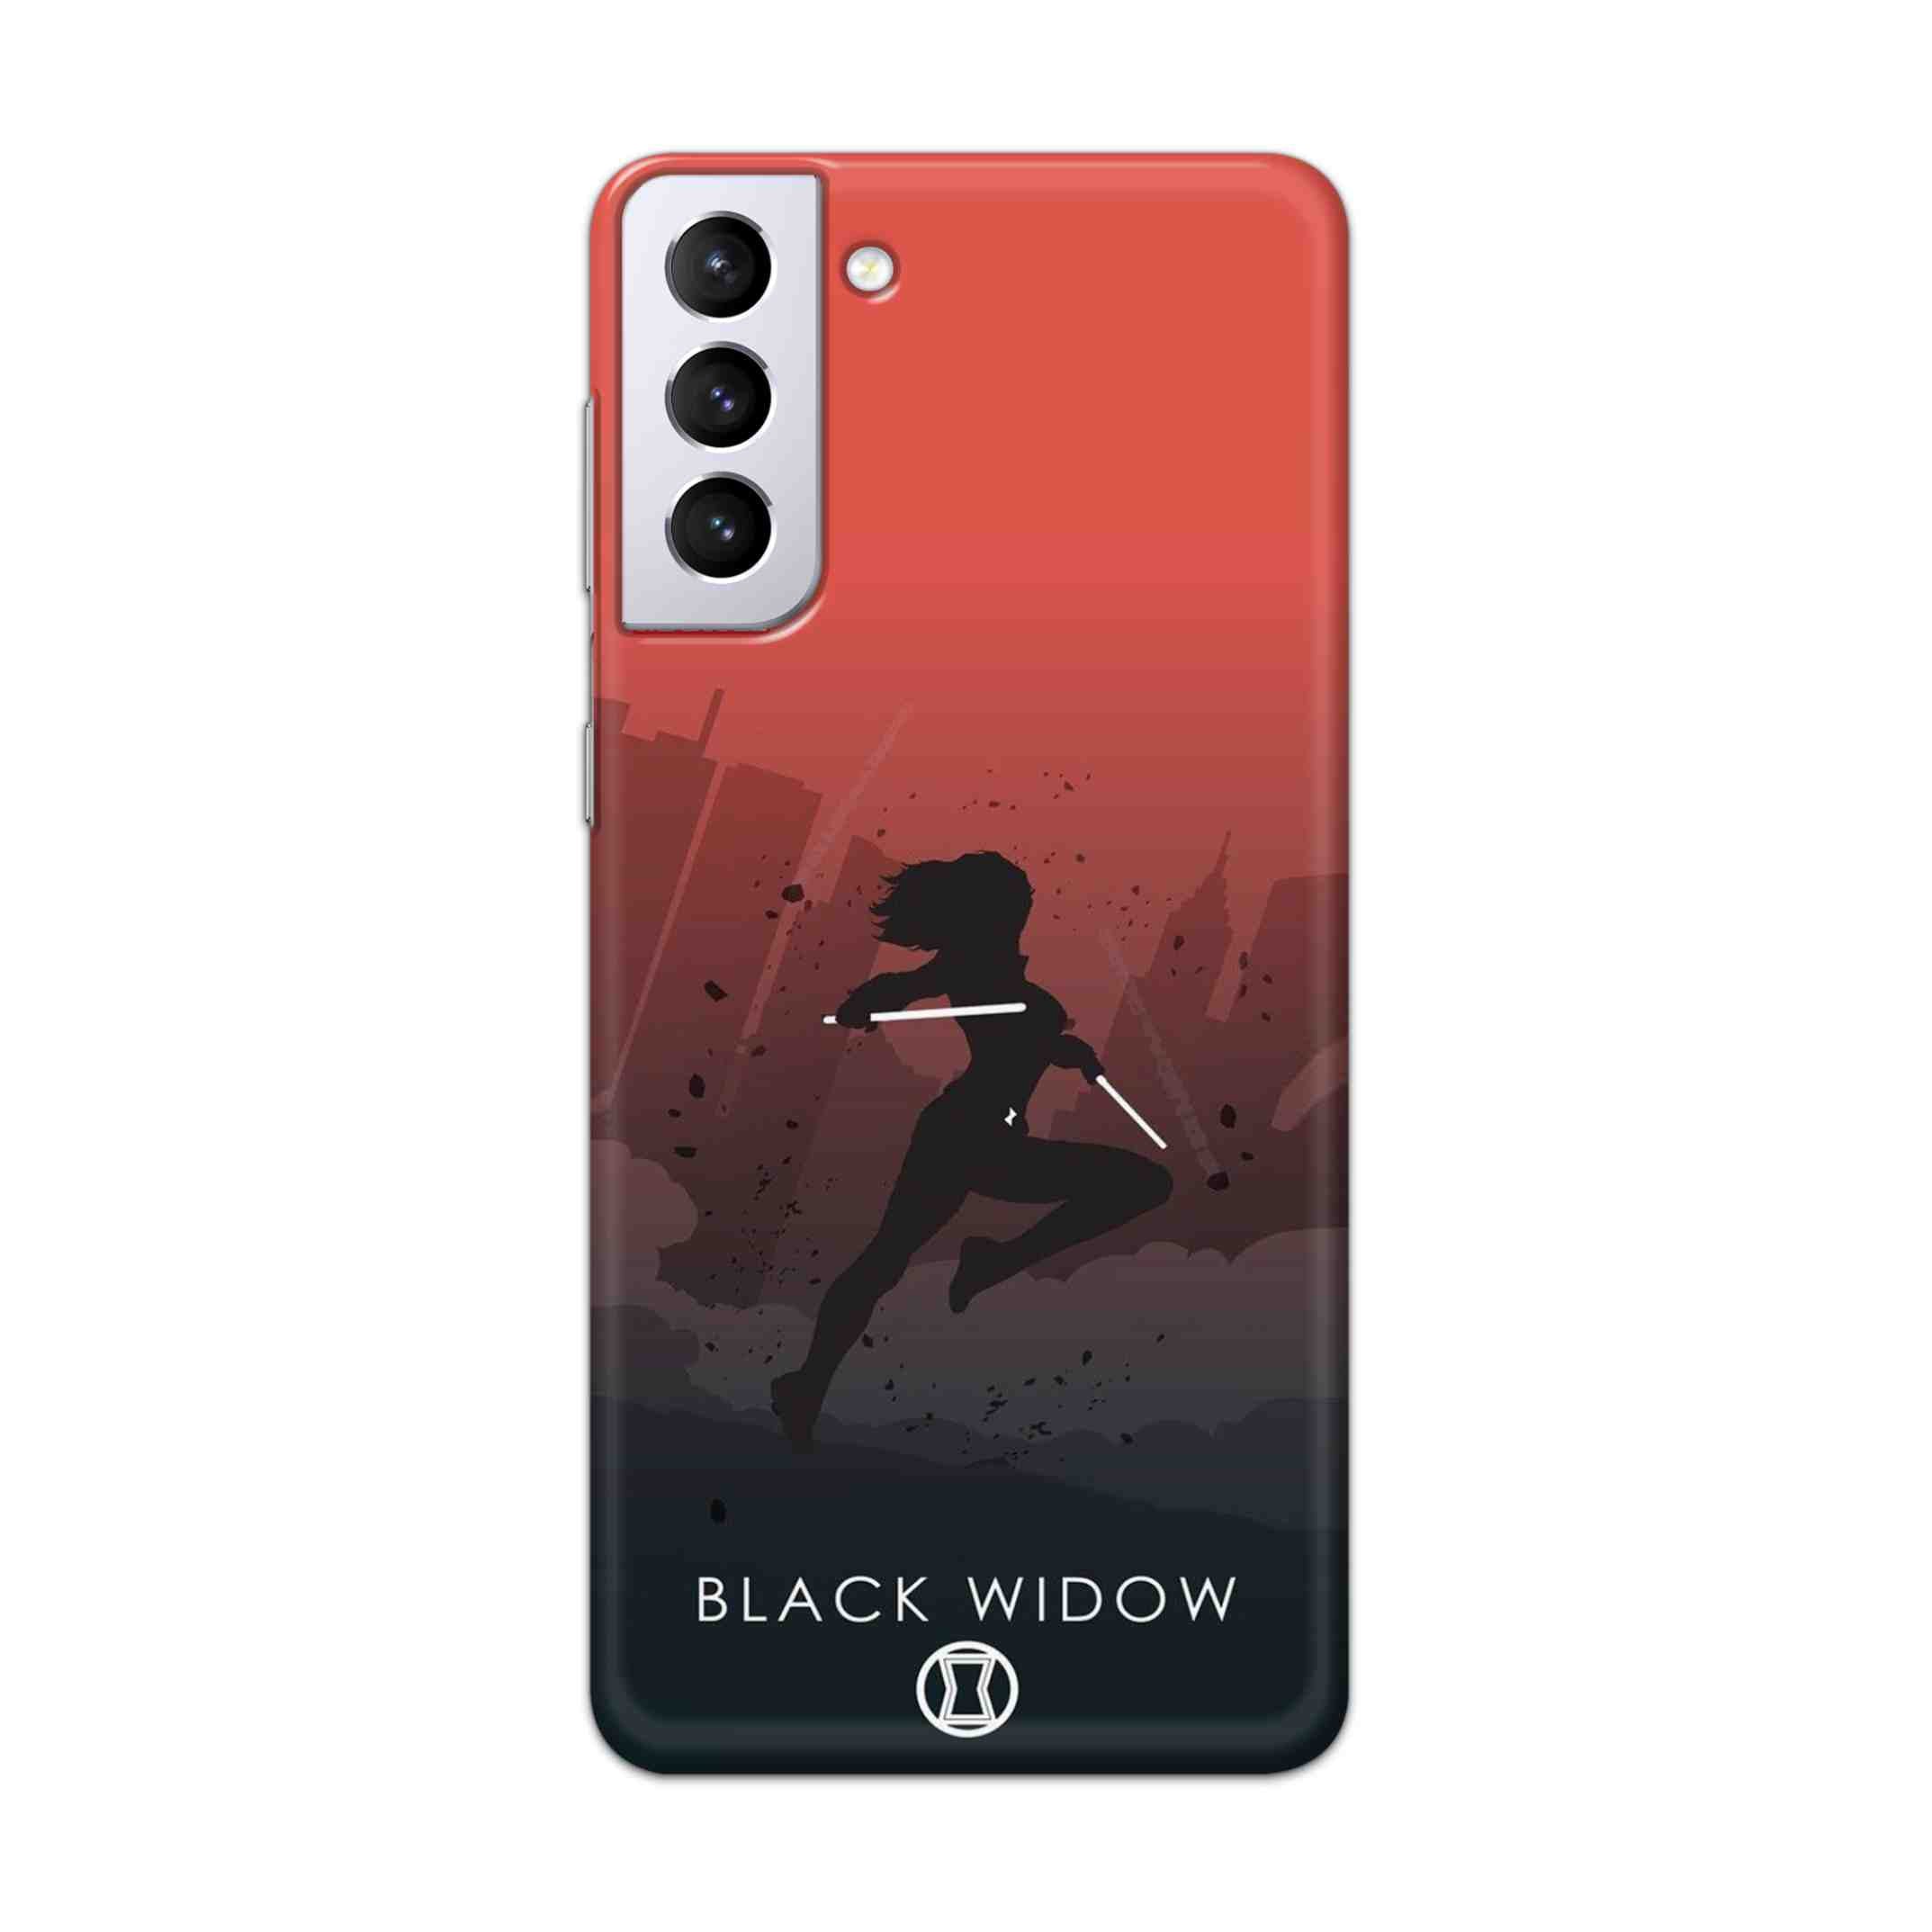 Buy Black Widow Hard Back Mobile Phone Case Cover For Samsung Galaxy S21 Plus Online